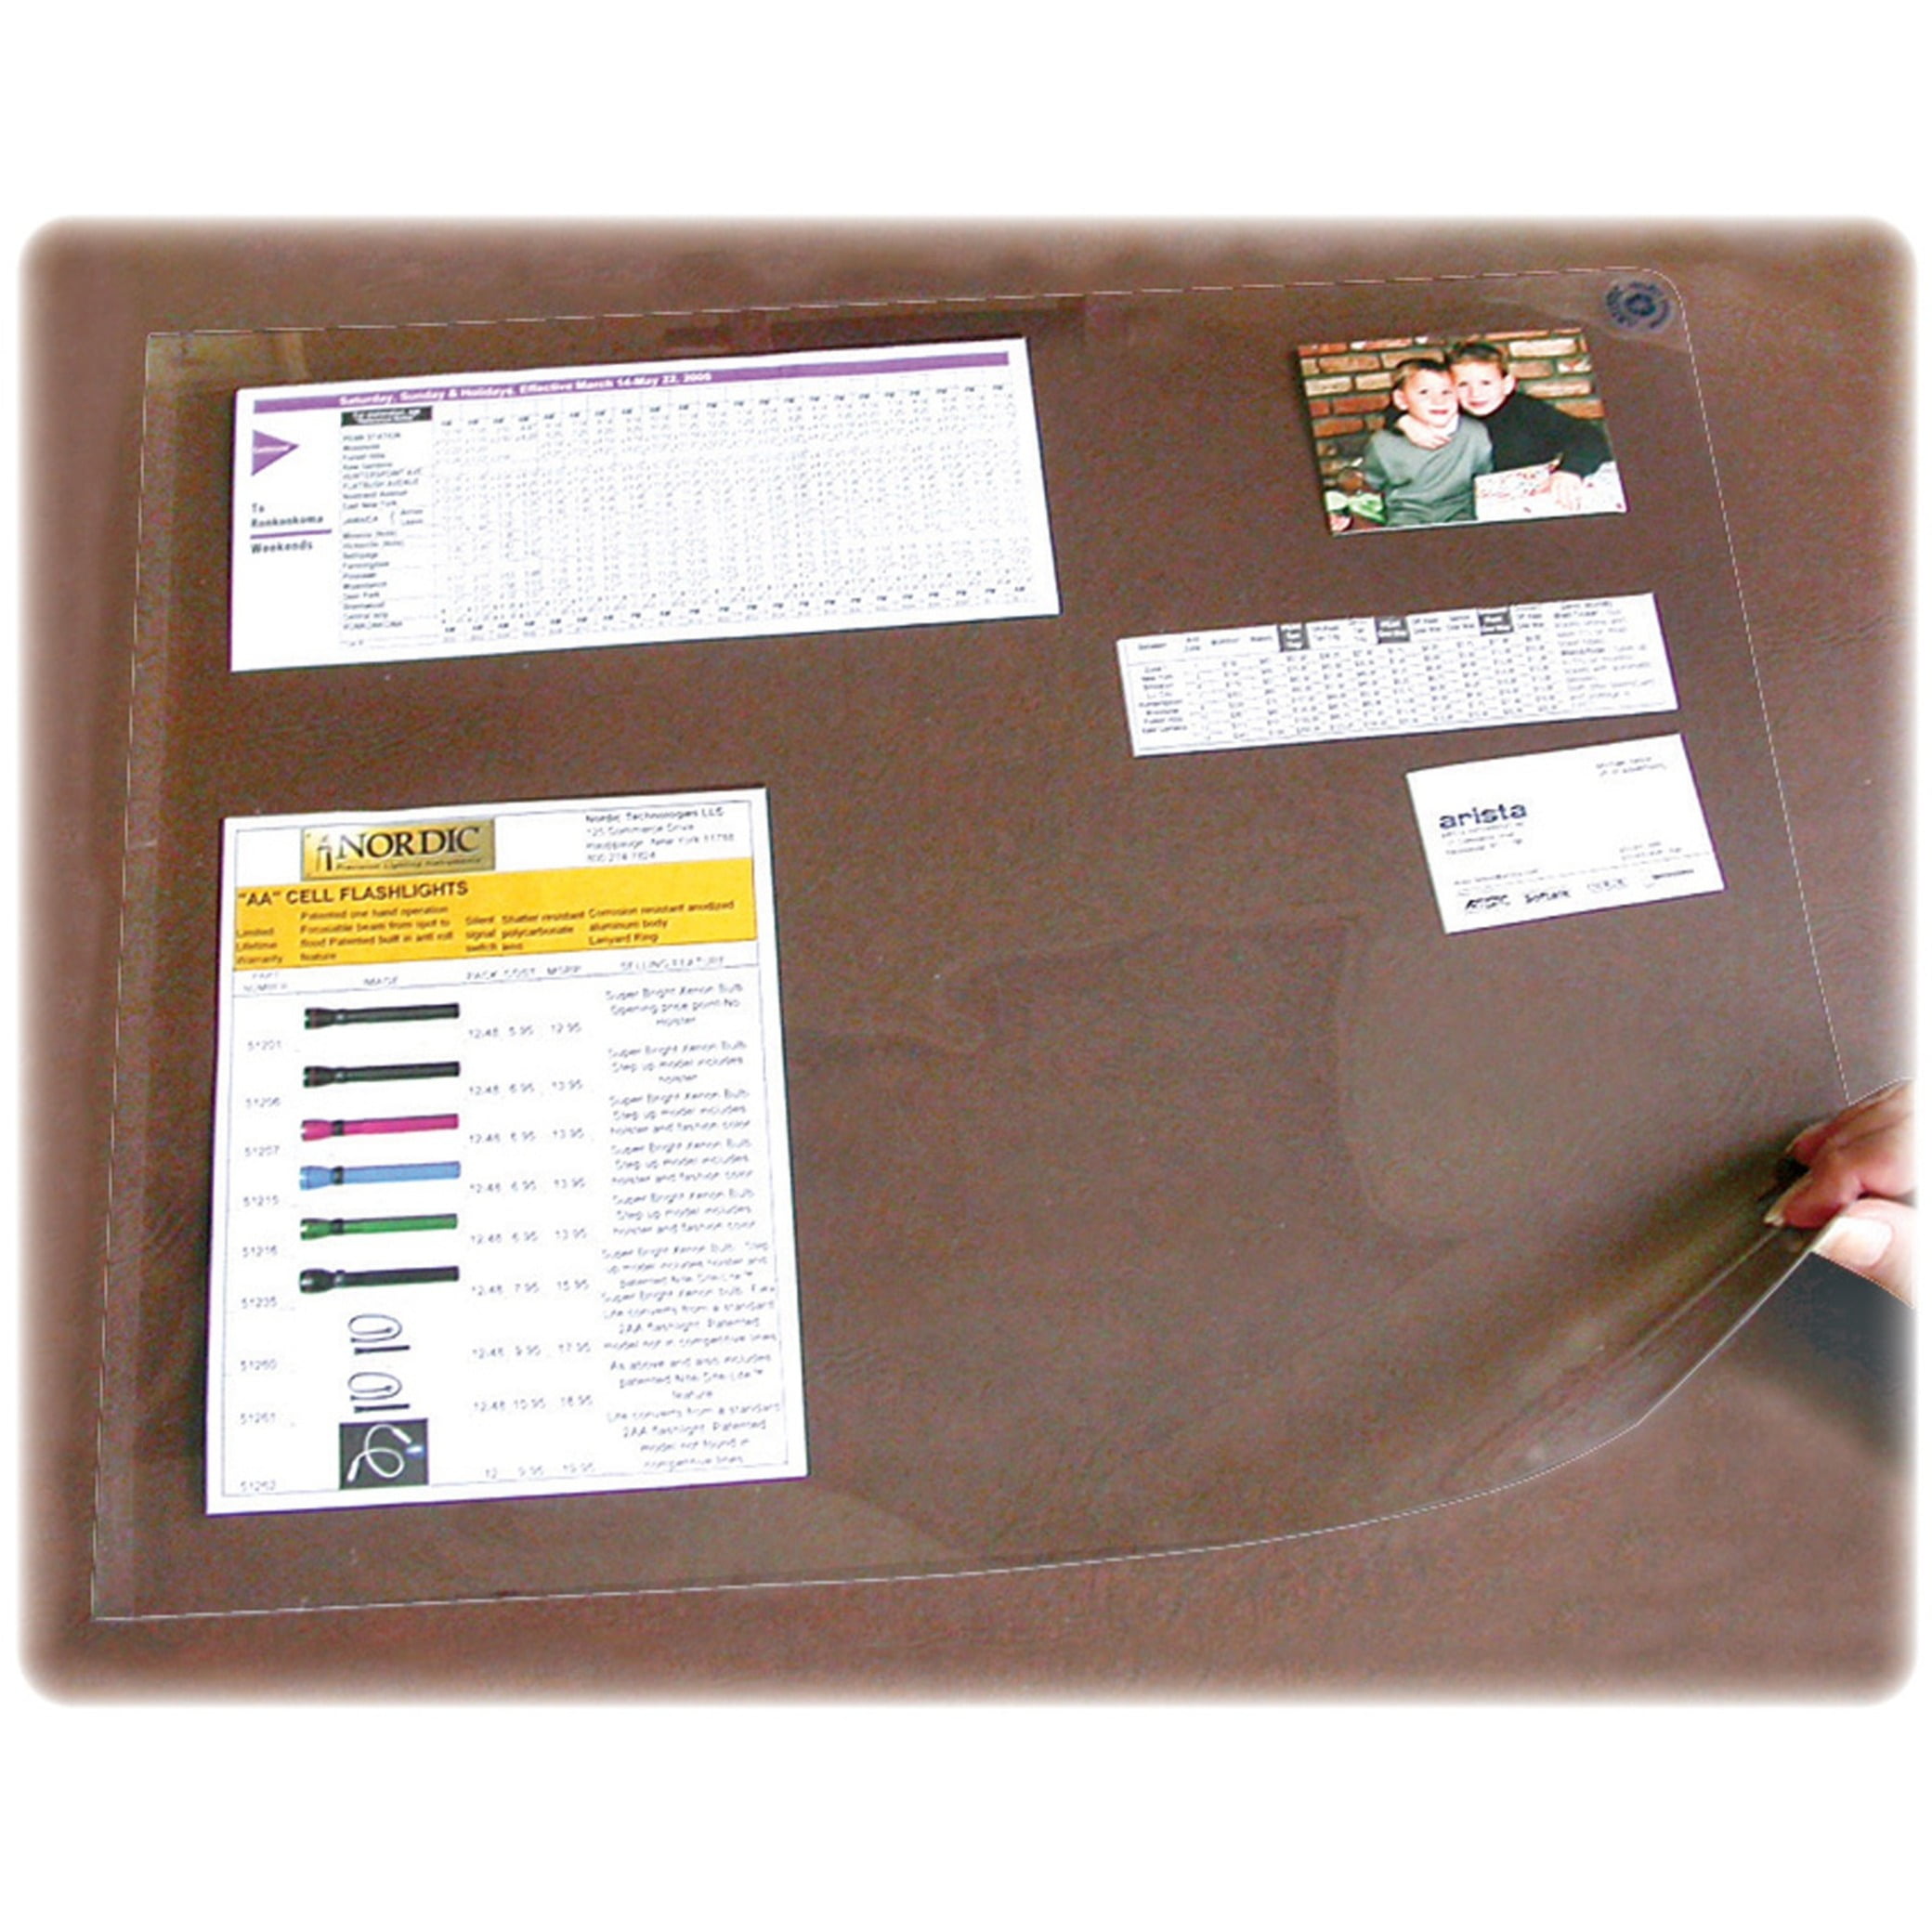 Artistic 17"x22" Plain White Paper Drawing & Note Desk Pad 50 Sheets, 